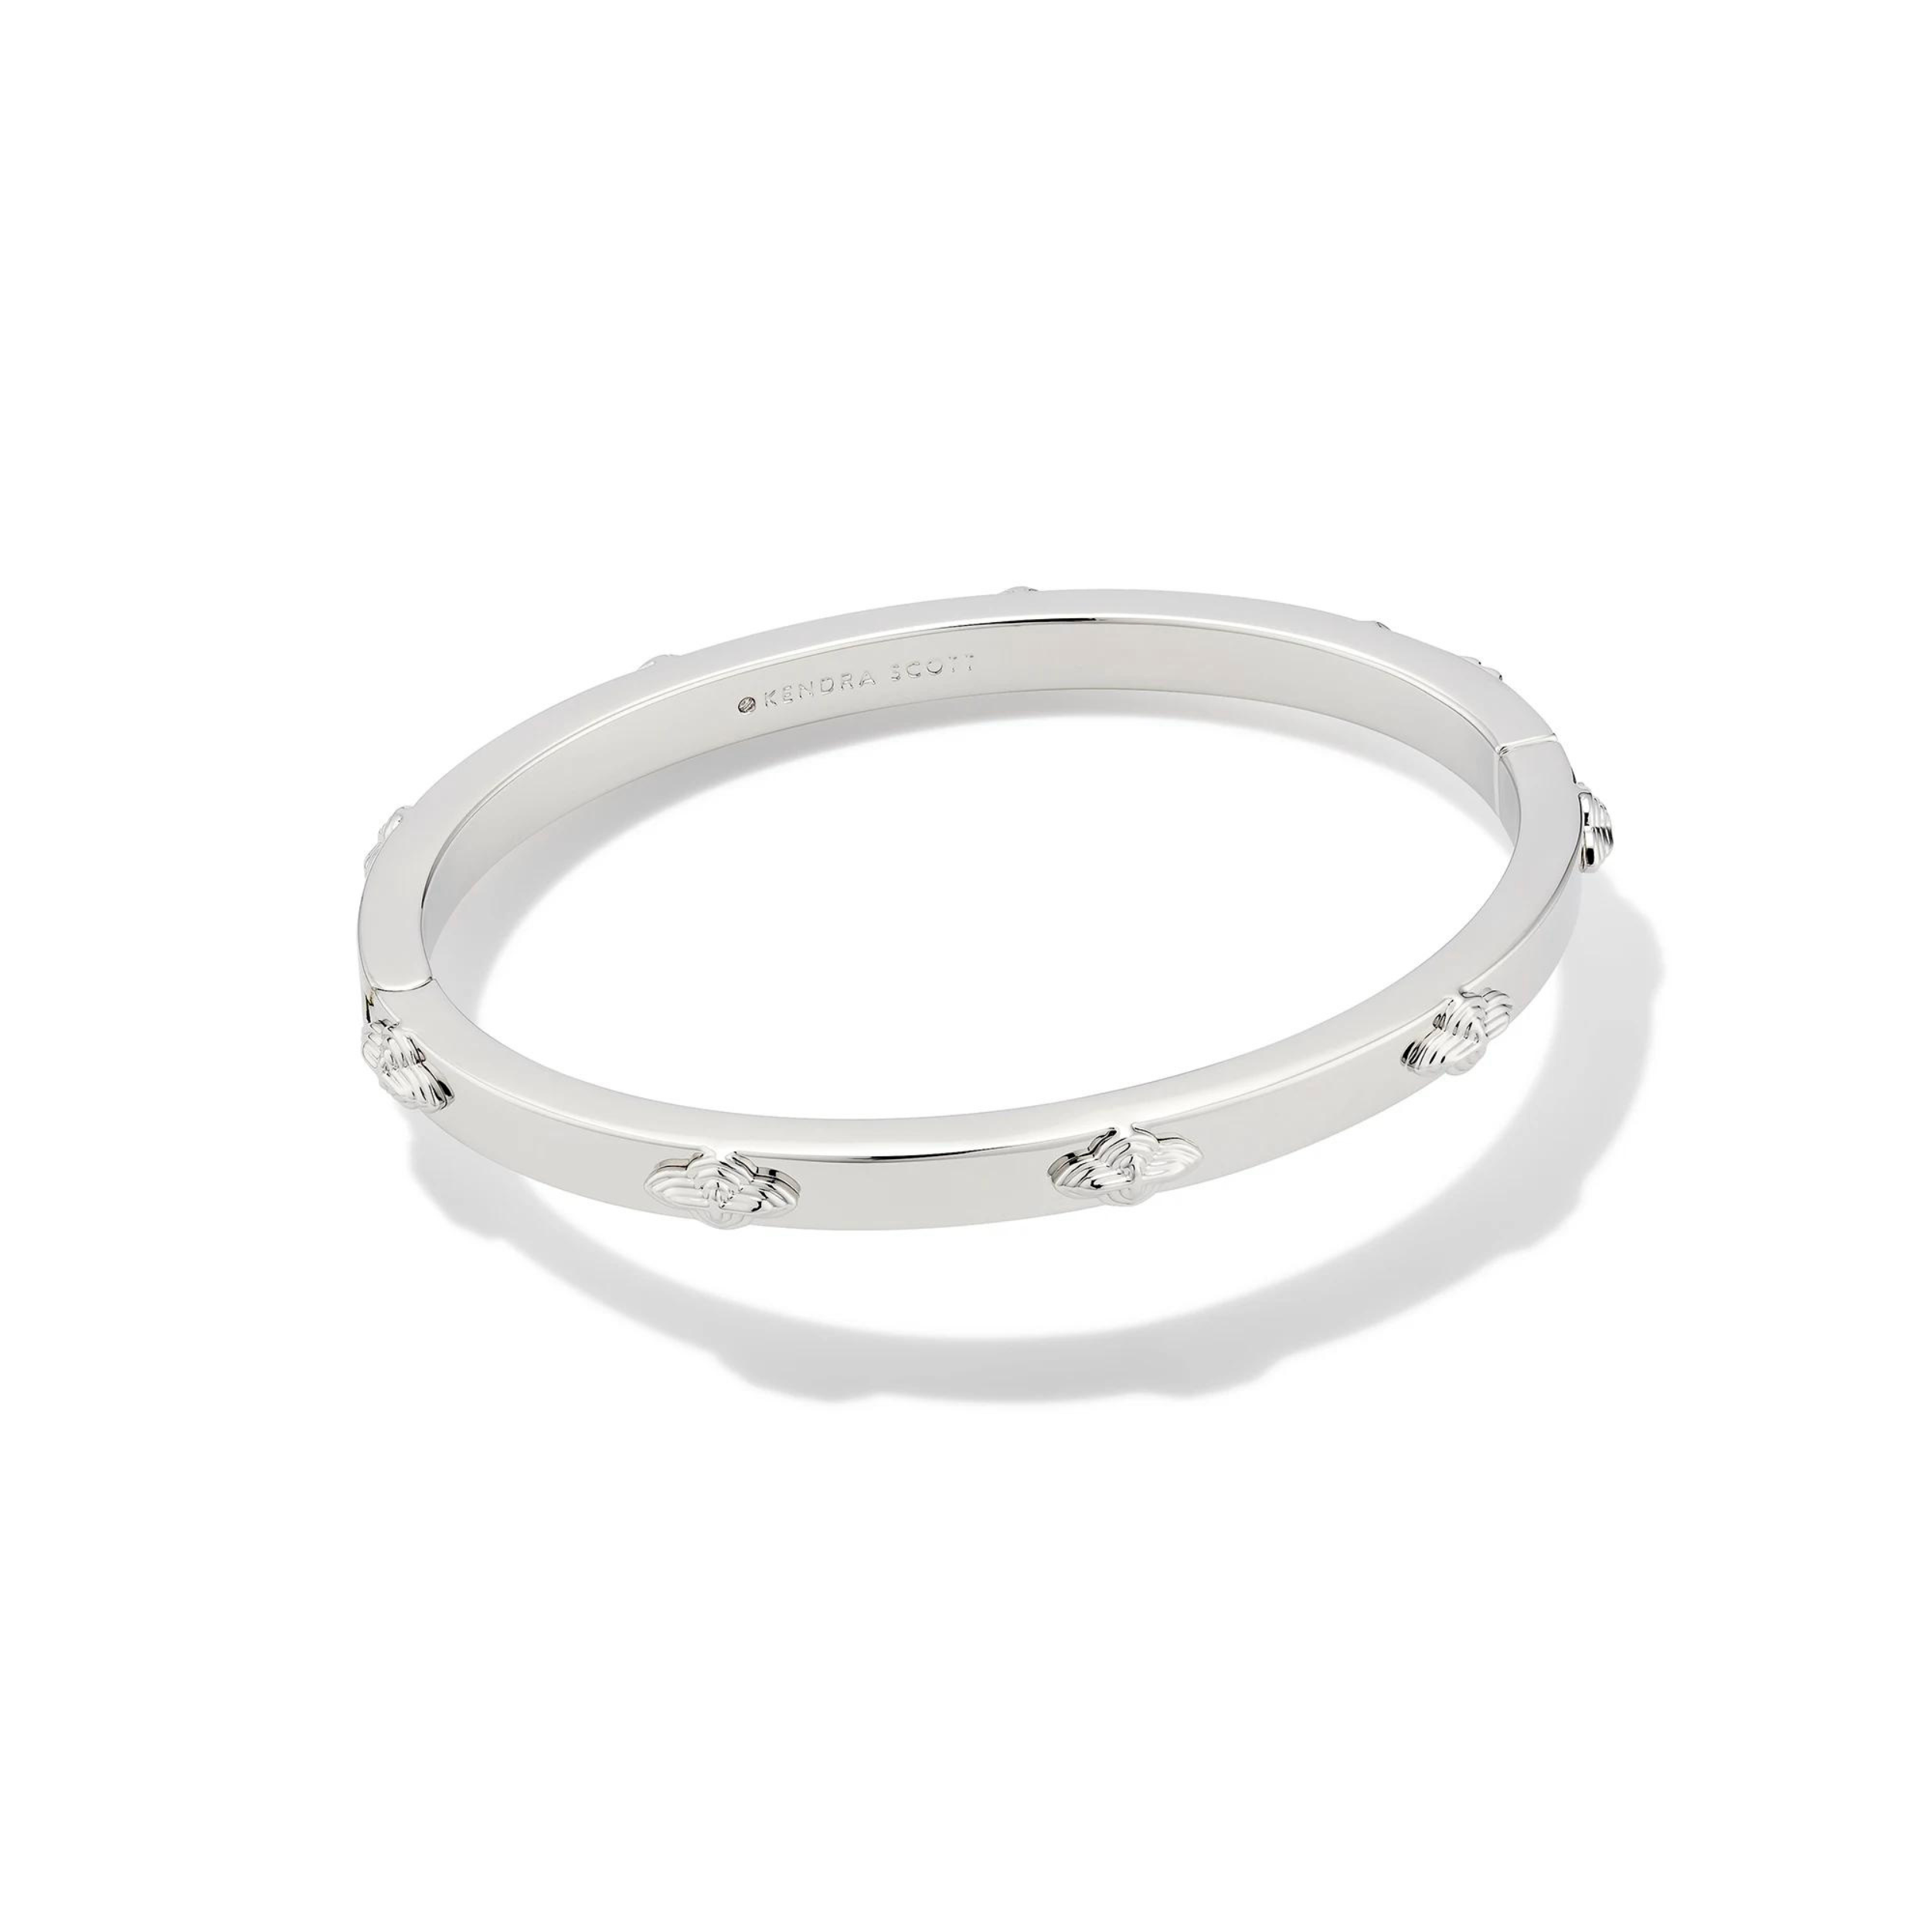 Kendra Scott | Abbie Metal Bangle Bracelet in Silver - Giddy Up Glamour Boutique